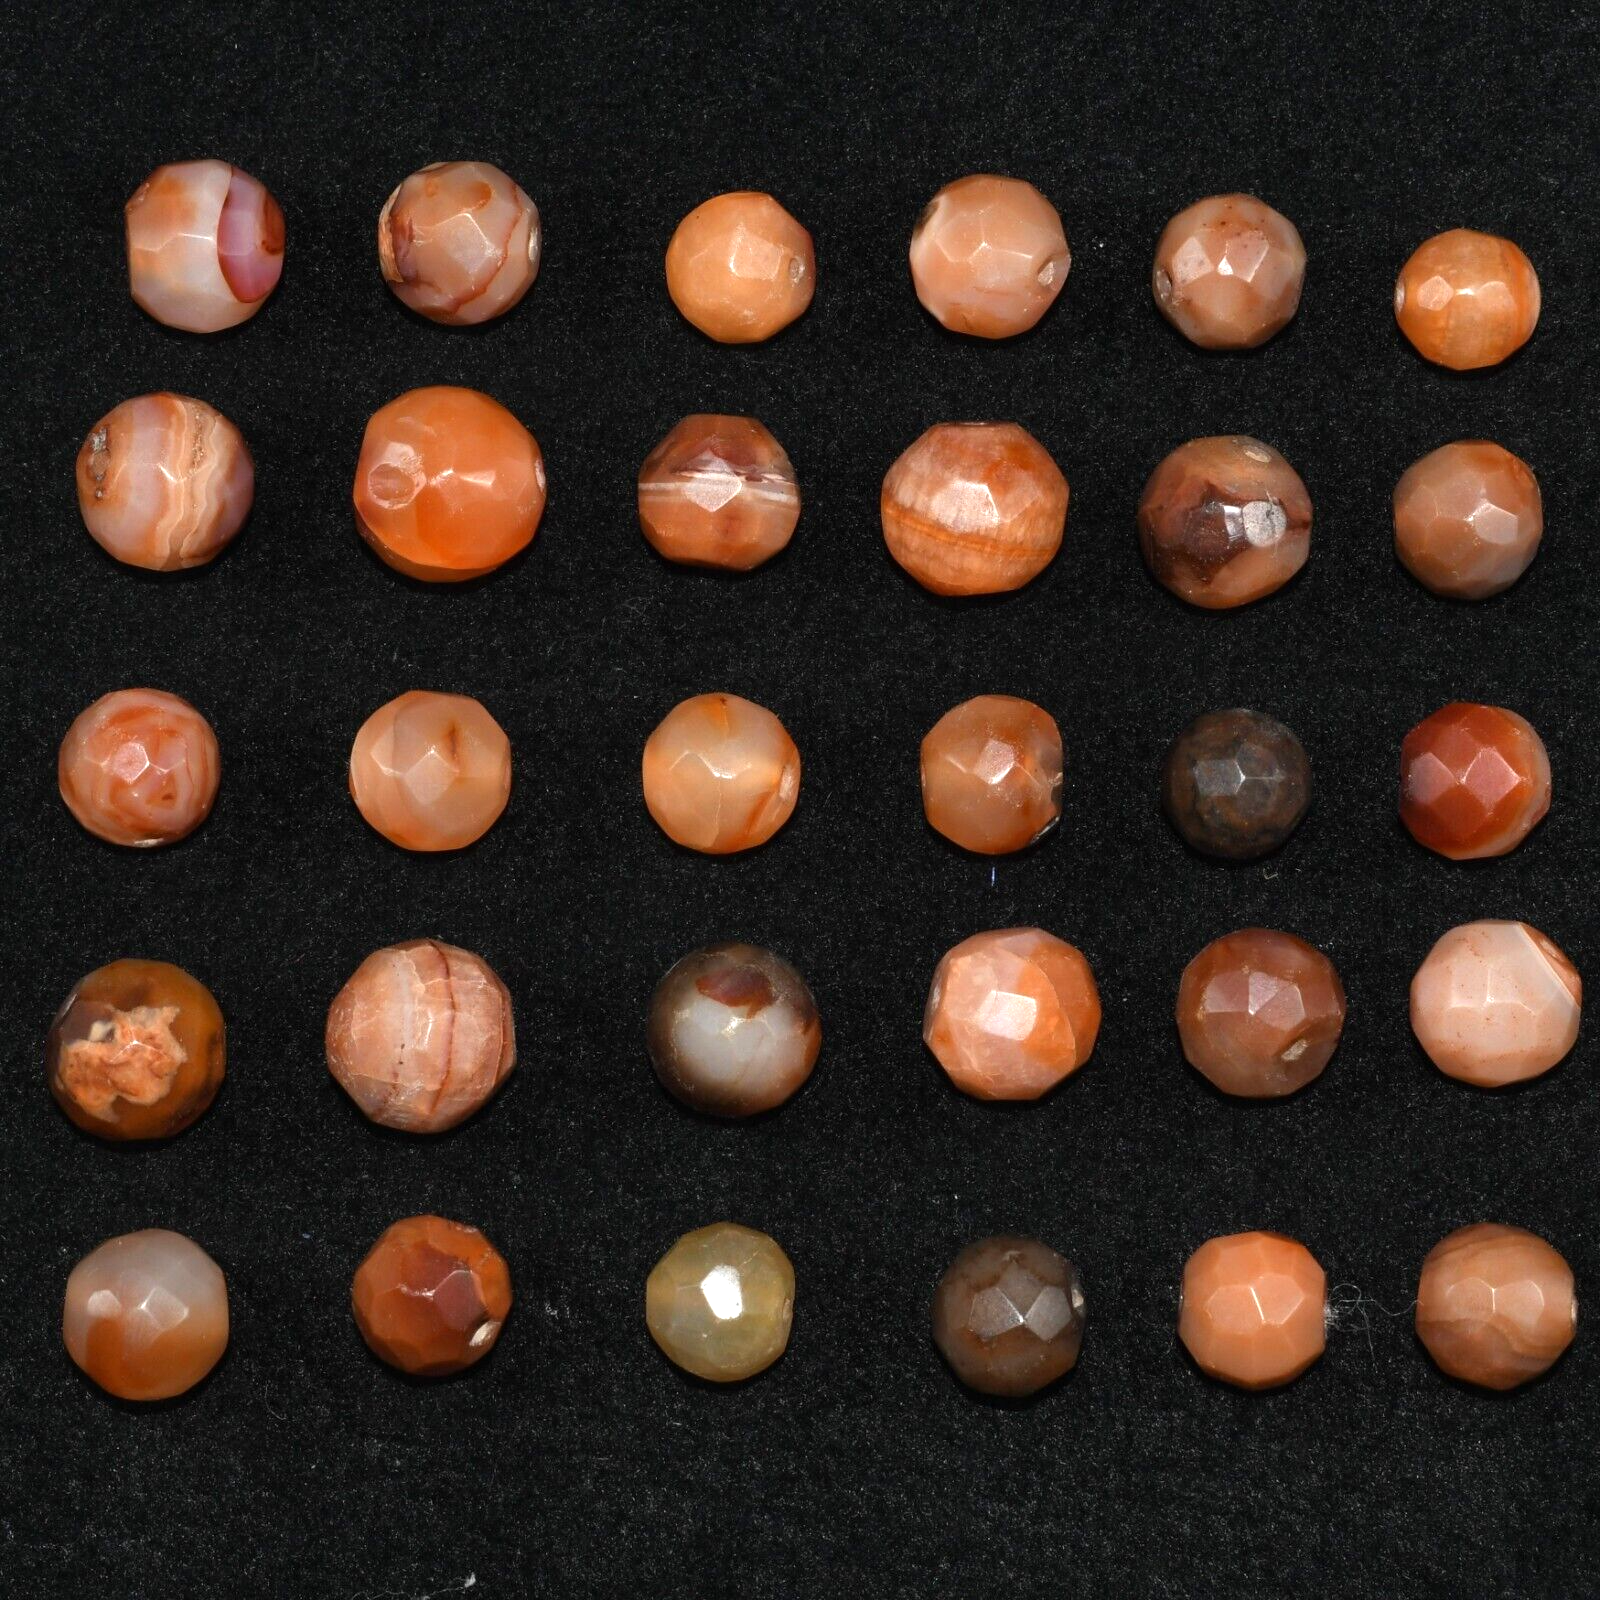 Lot Sale 30 Large Ancient Yemeni Aqeeq Carnelian Stone Beads in Good Condition Ancient